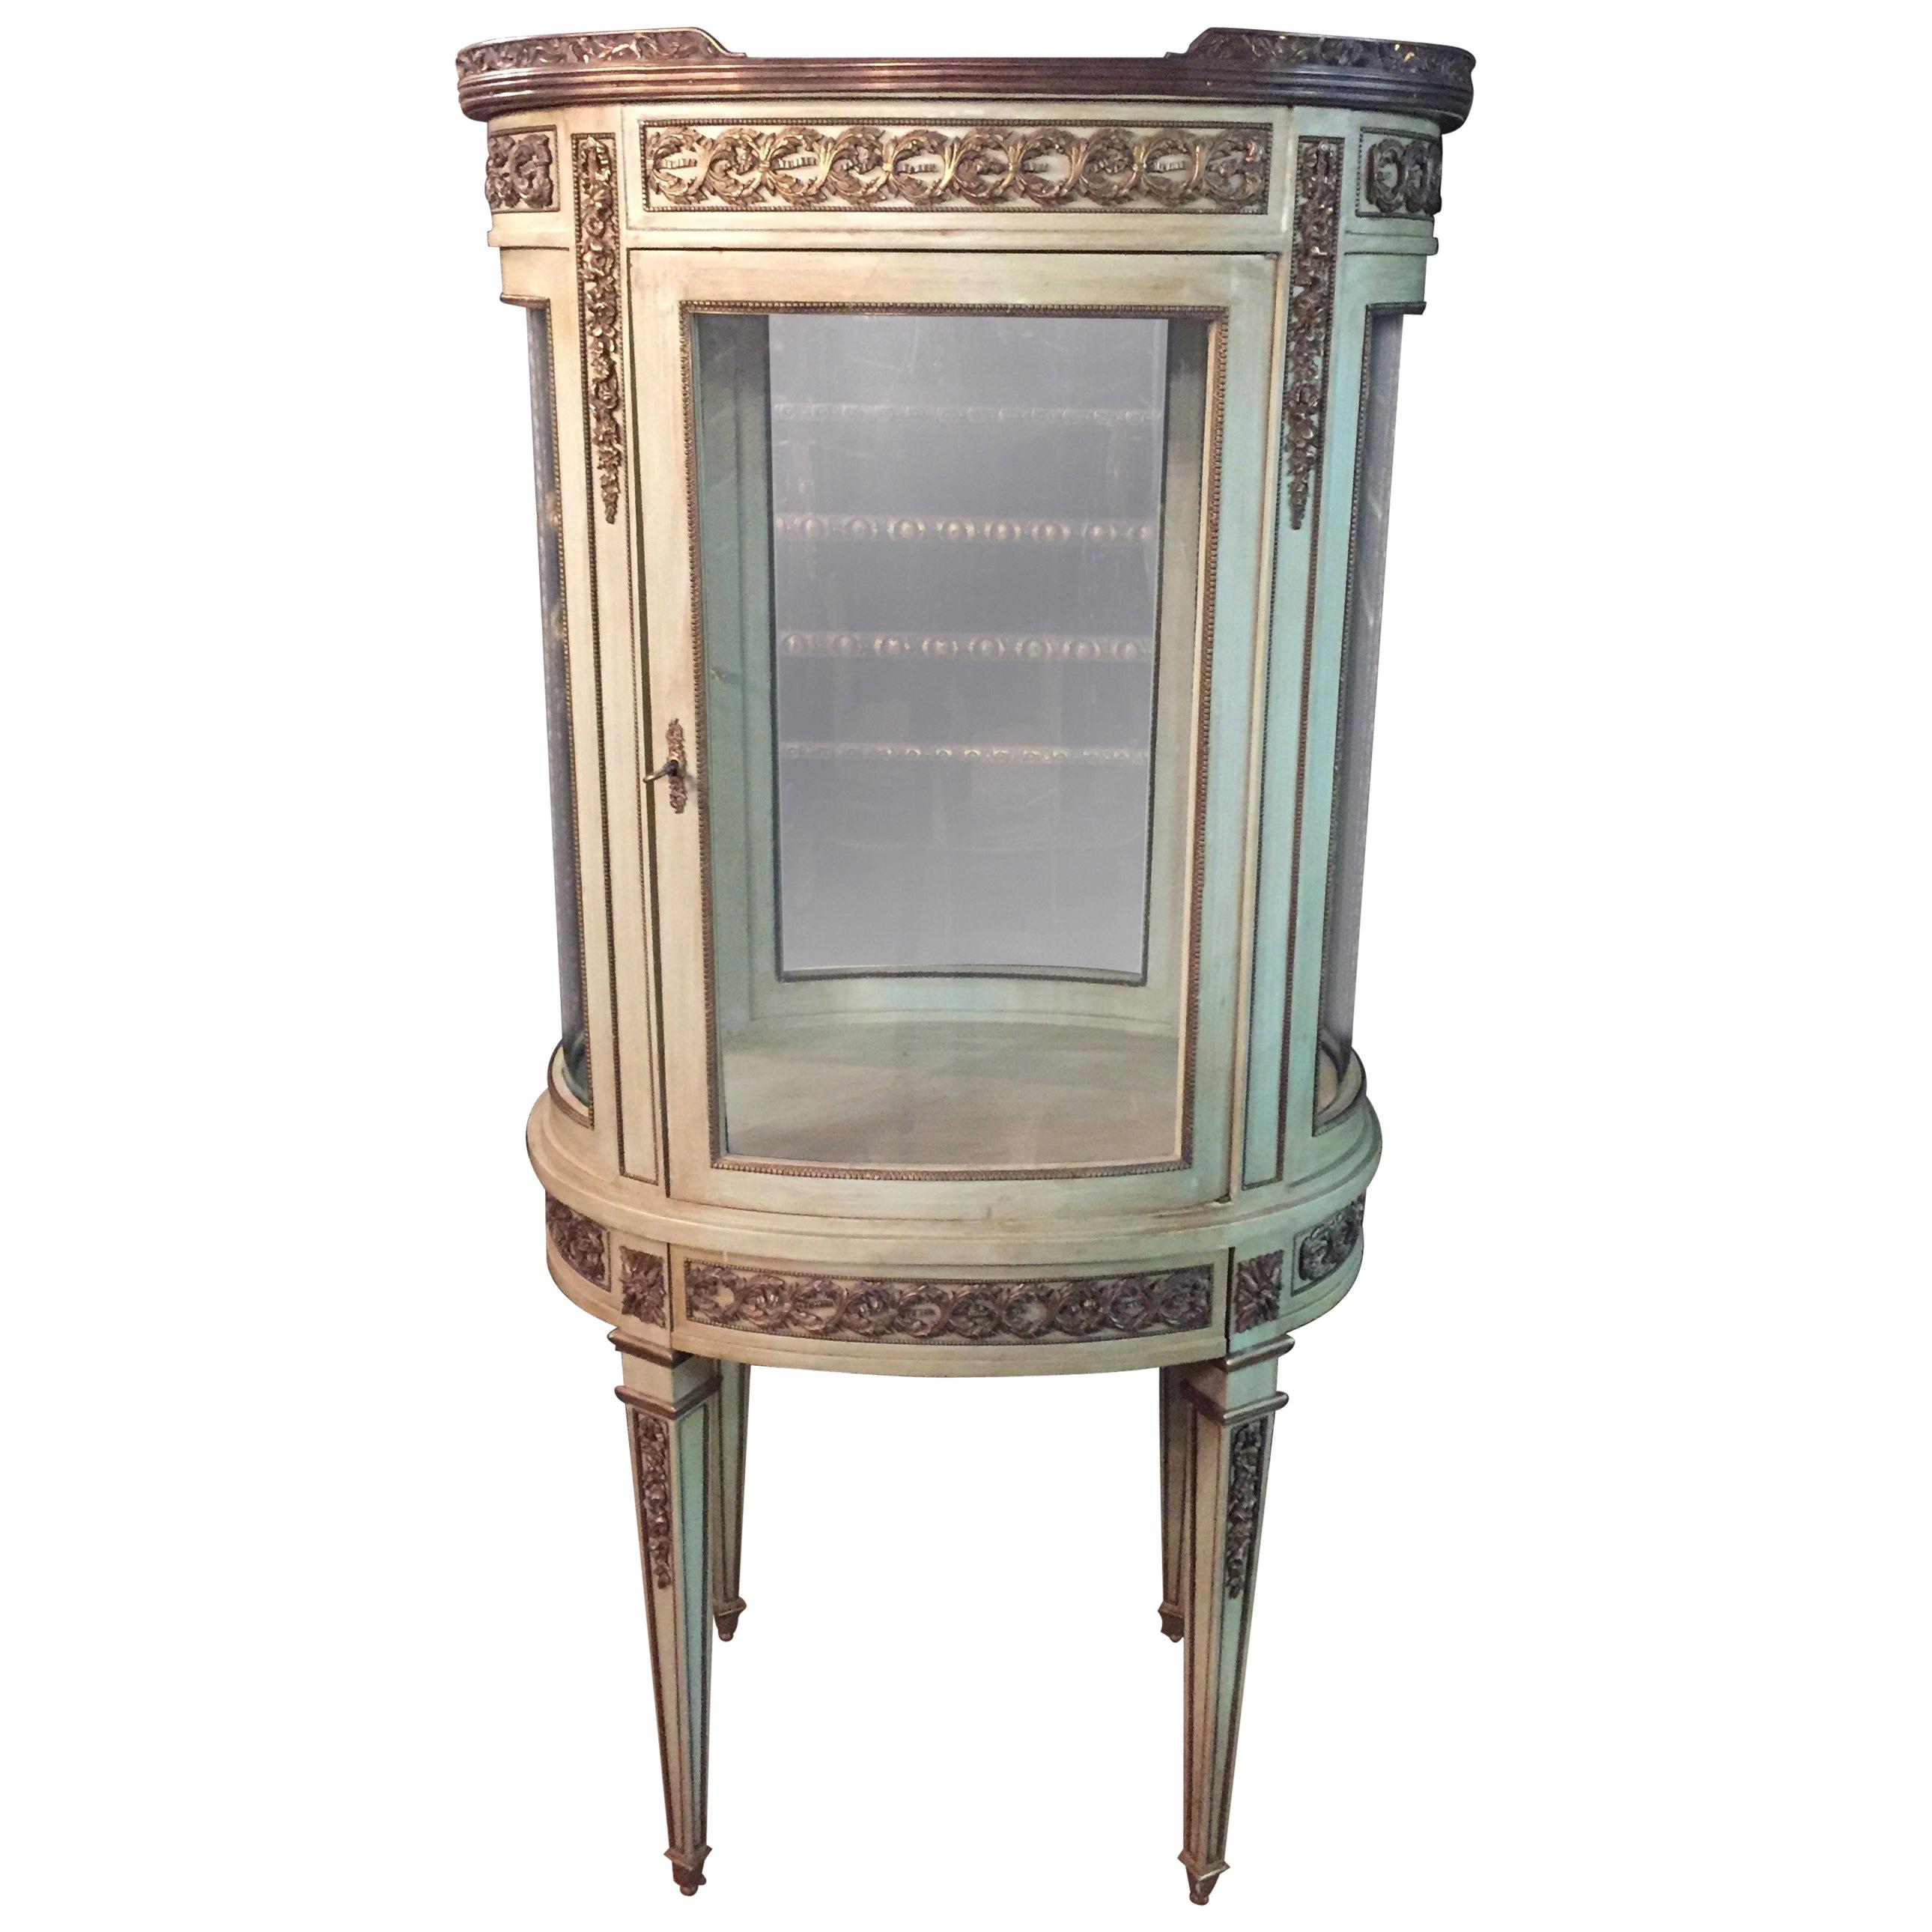 French Salon Vitrine in Antique Louis XVI Classicist Style Hand crafted